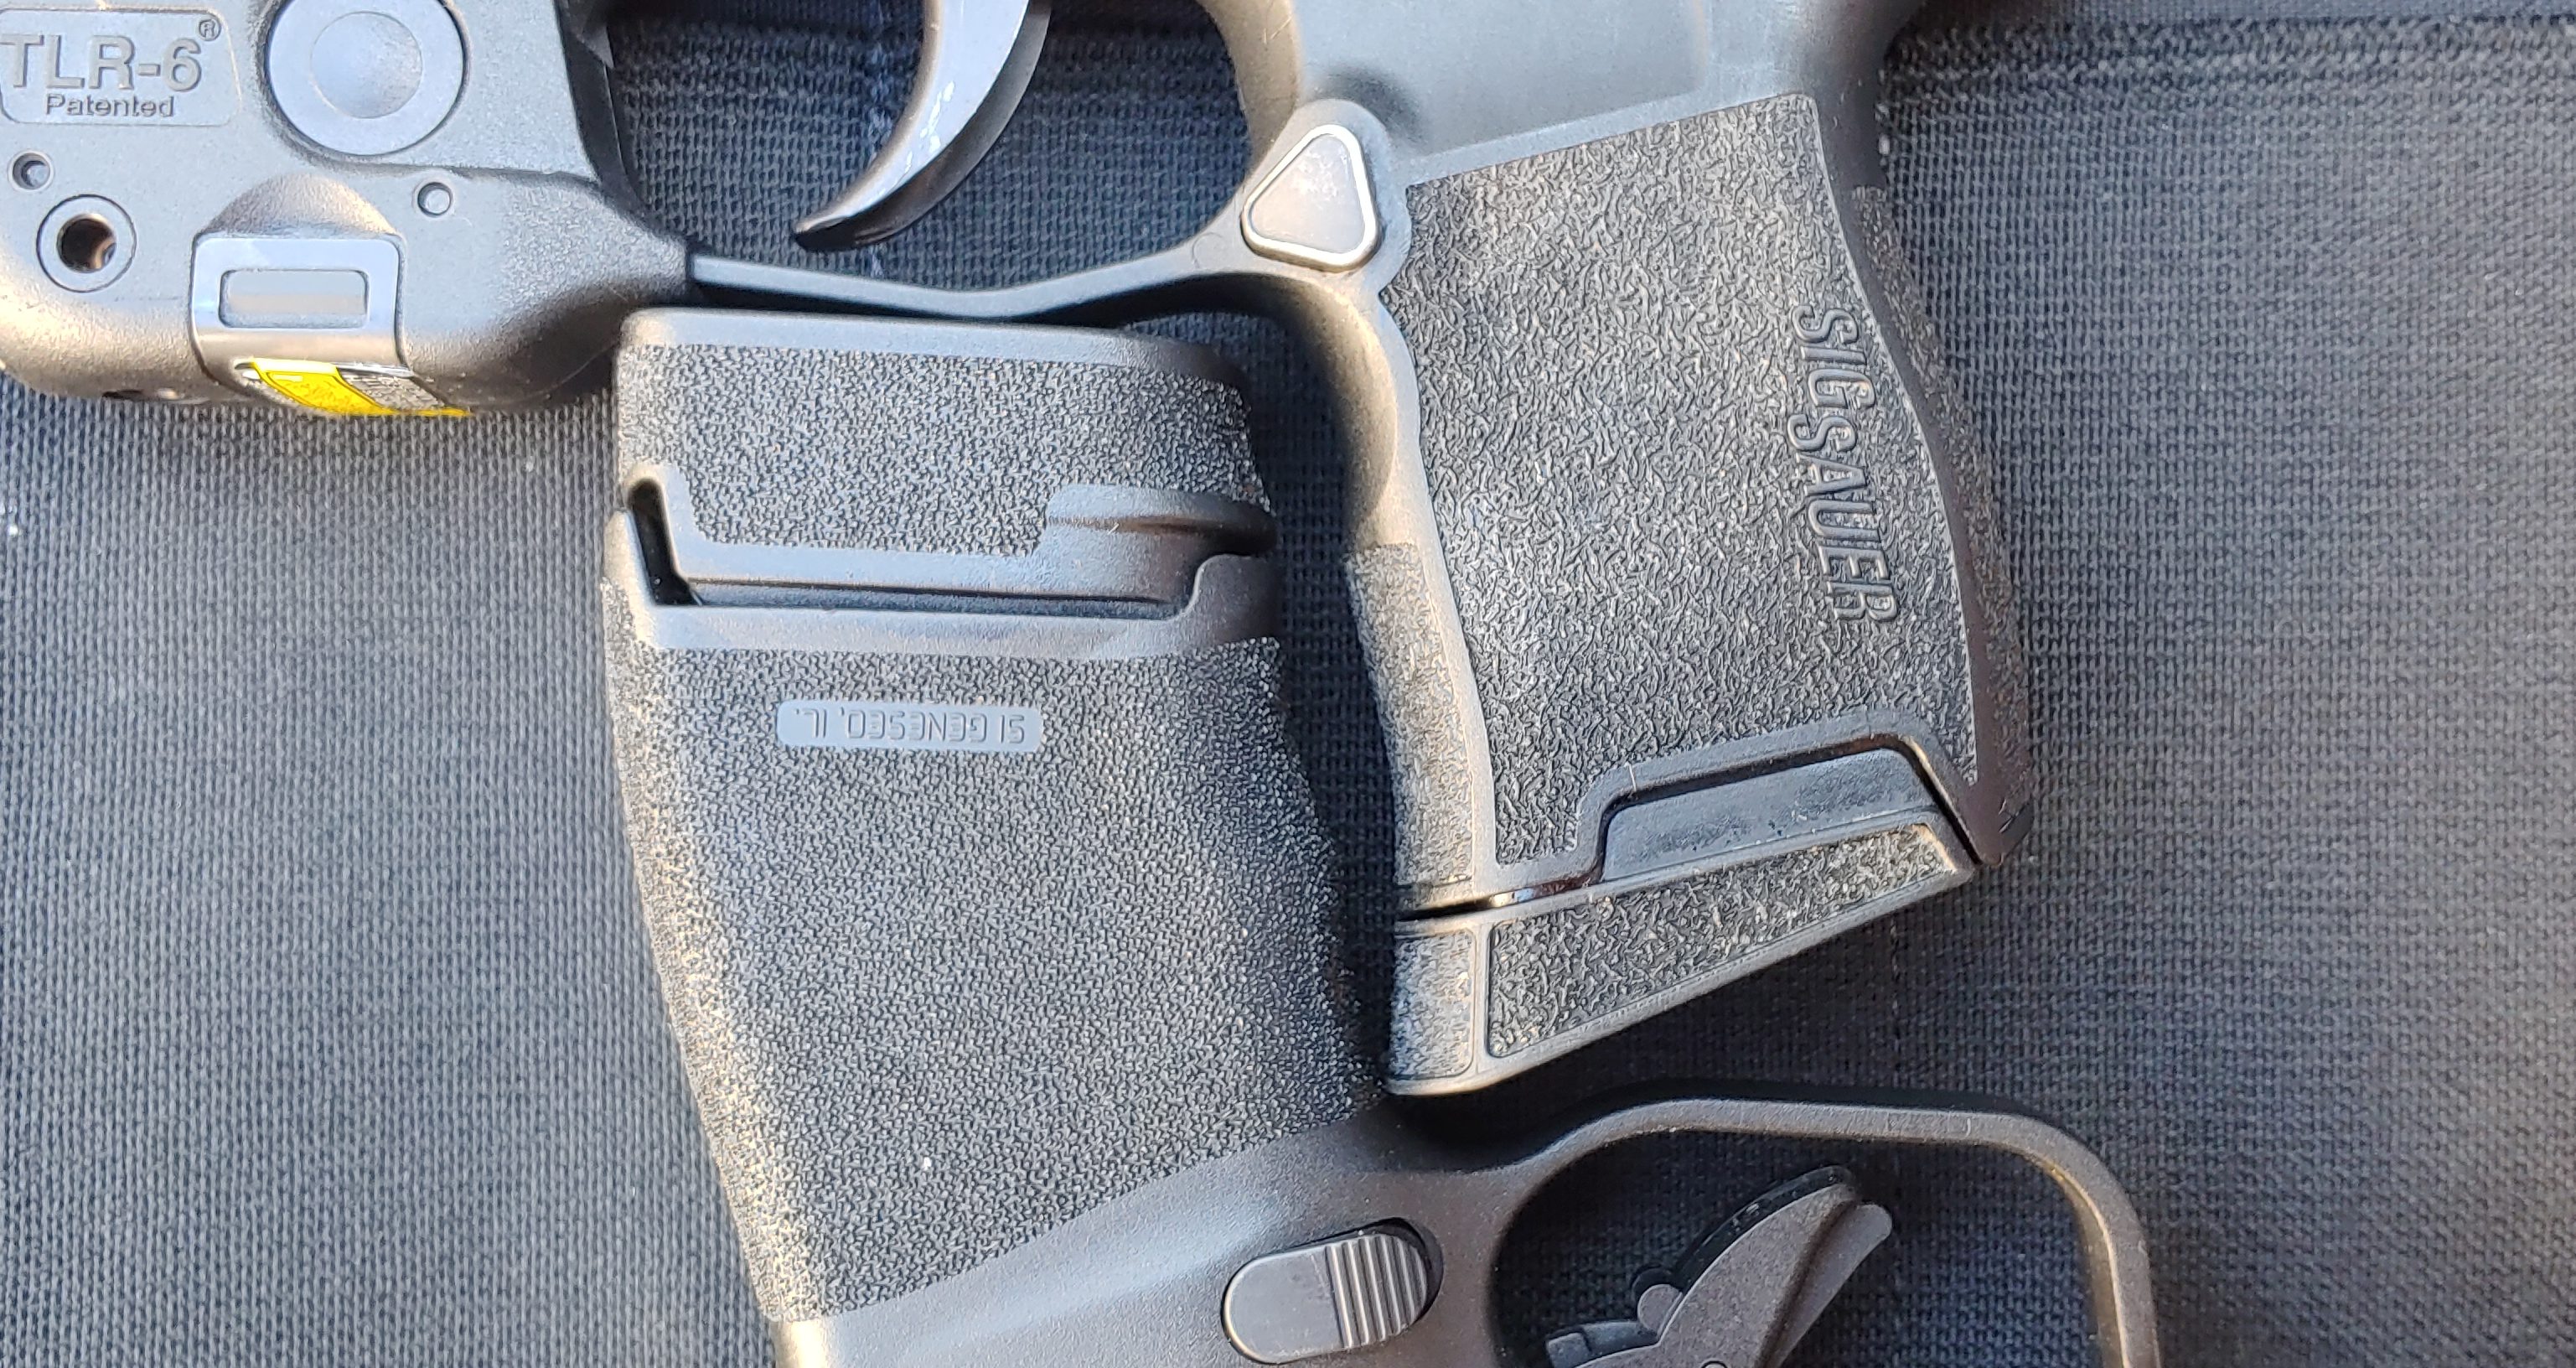 SIG P365, Springfield Hellcat, micro-compact, pistol, concealed carry, CCW, Springfield Armory, Hellcat, P365, Sig Sauer, best concealed carry gun, CCP, best concealed carry holster, IWB, OWB, best hybrid holster, holster, holsters, concealed carry holster, holster for concealed carry, micro-compact pistol, concealed carry firearms, new guns, best gun for concealed carry, CrossBreed Holsters, CrossBreed Blog, Travis Pike